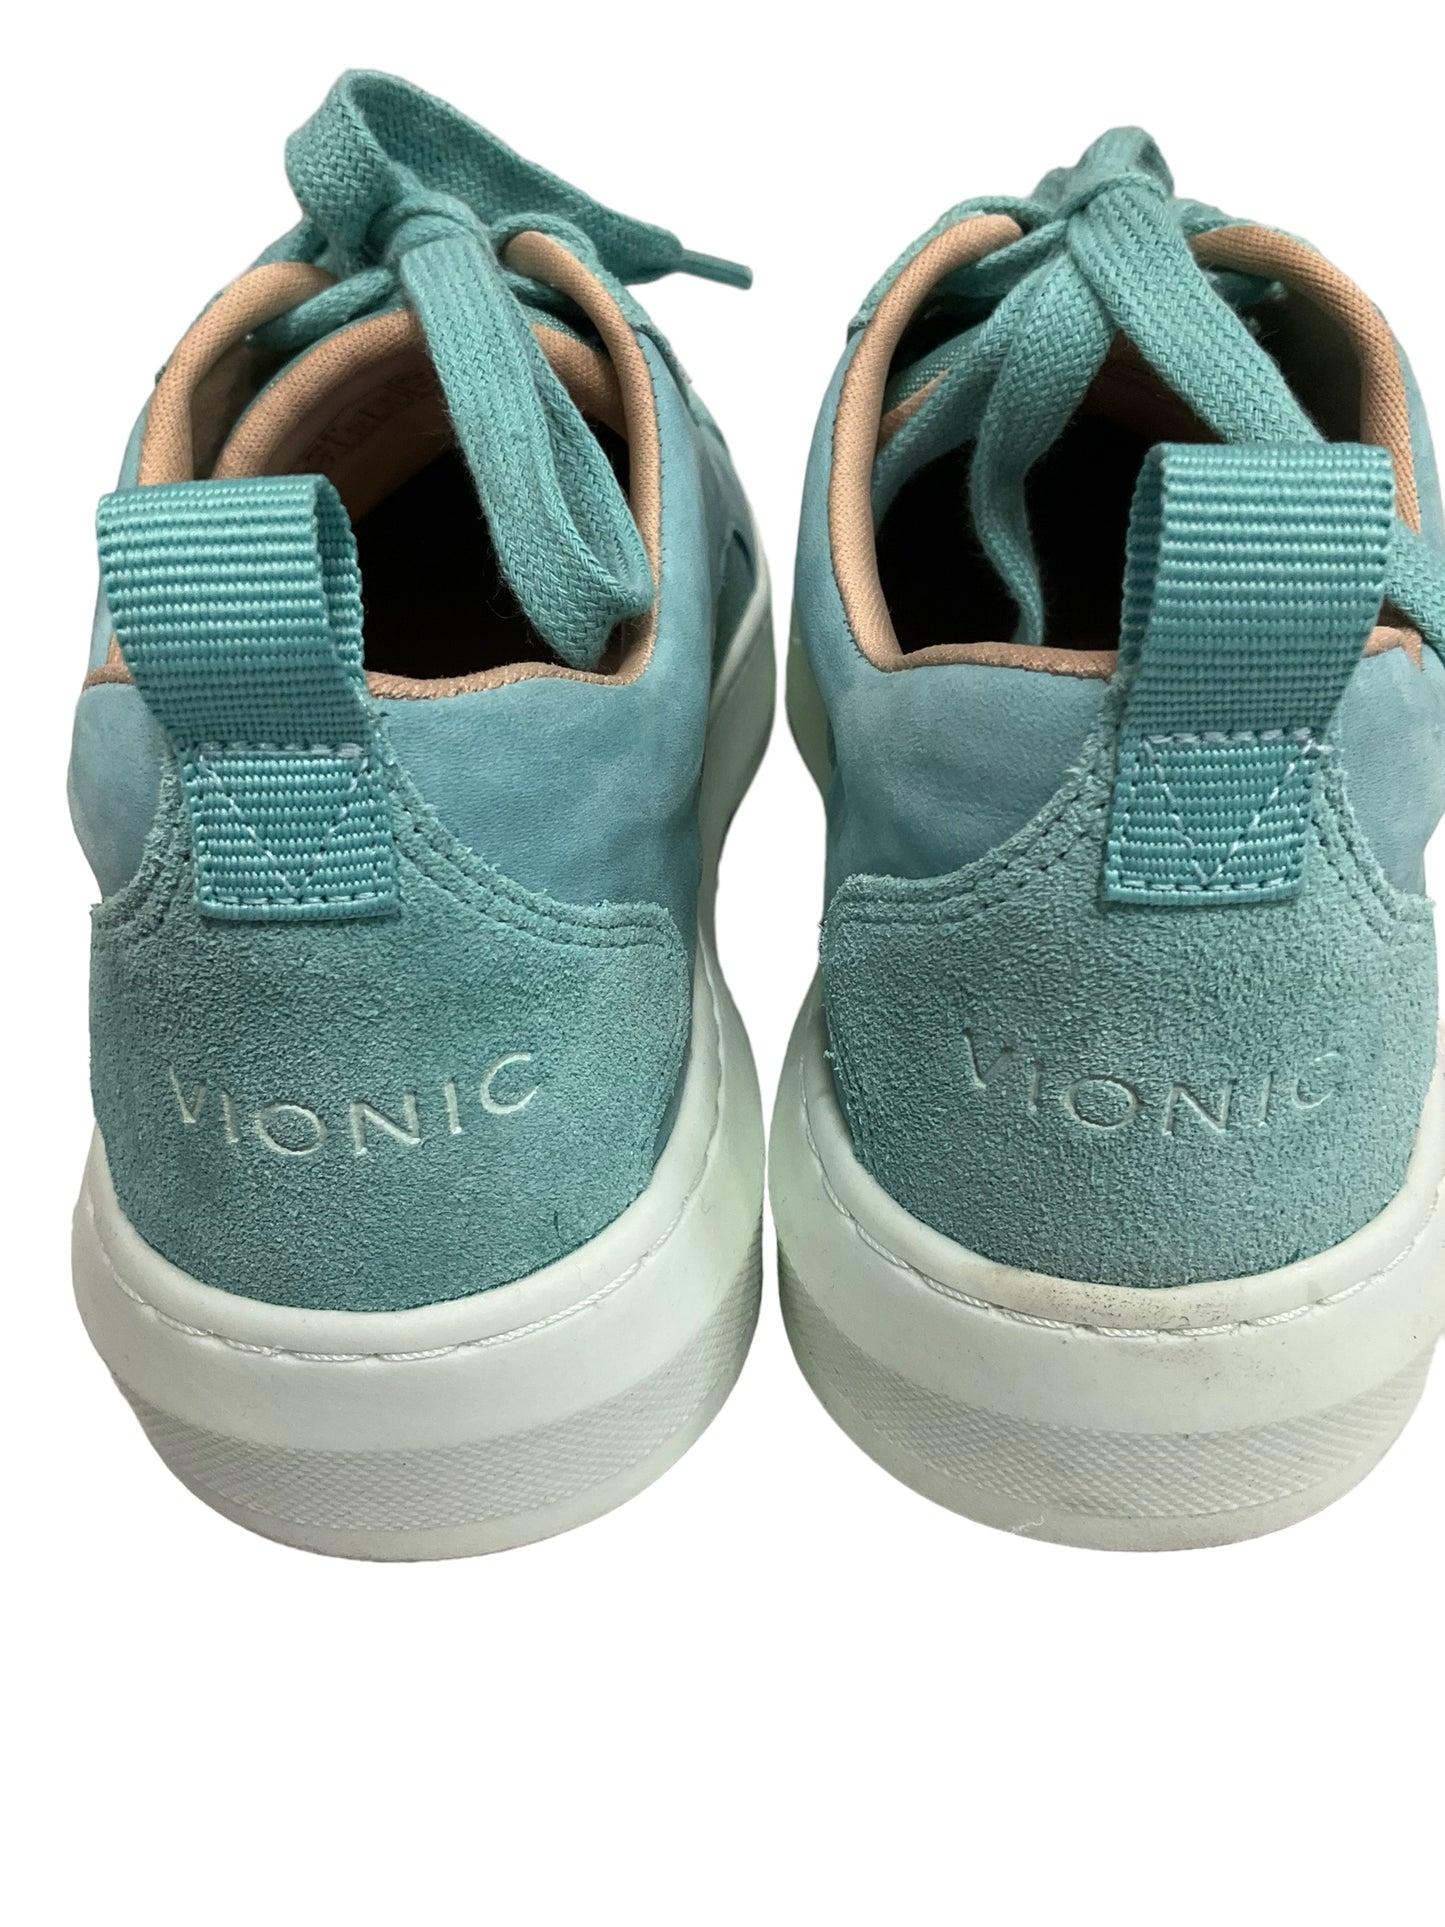 Shoes Sneakers By Vionic  Size: 6